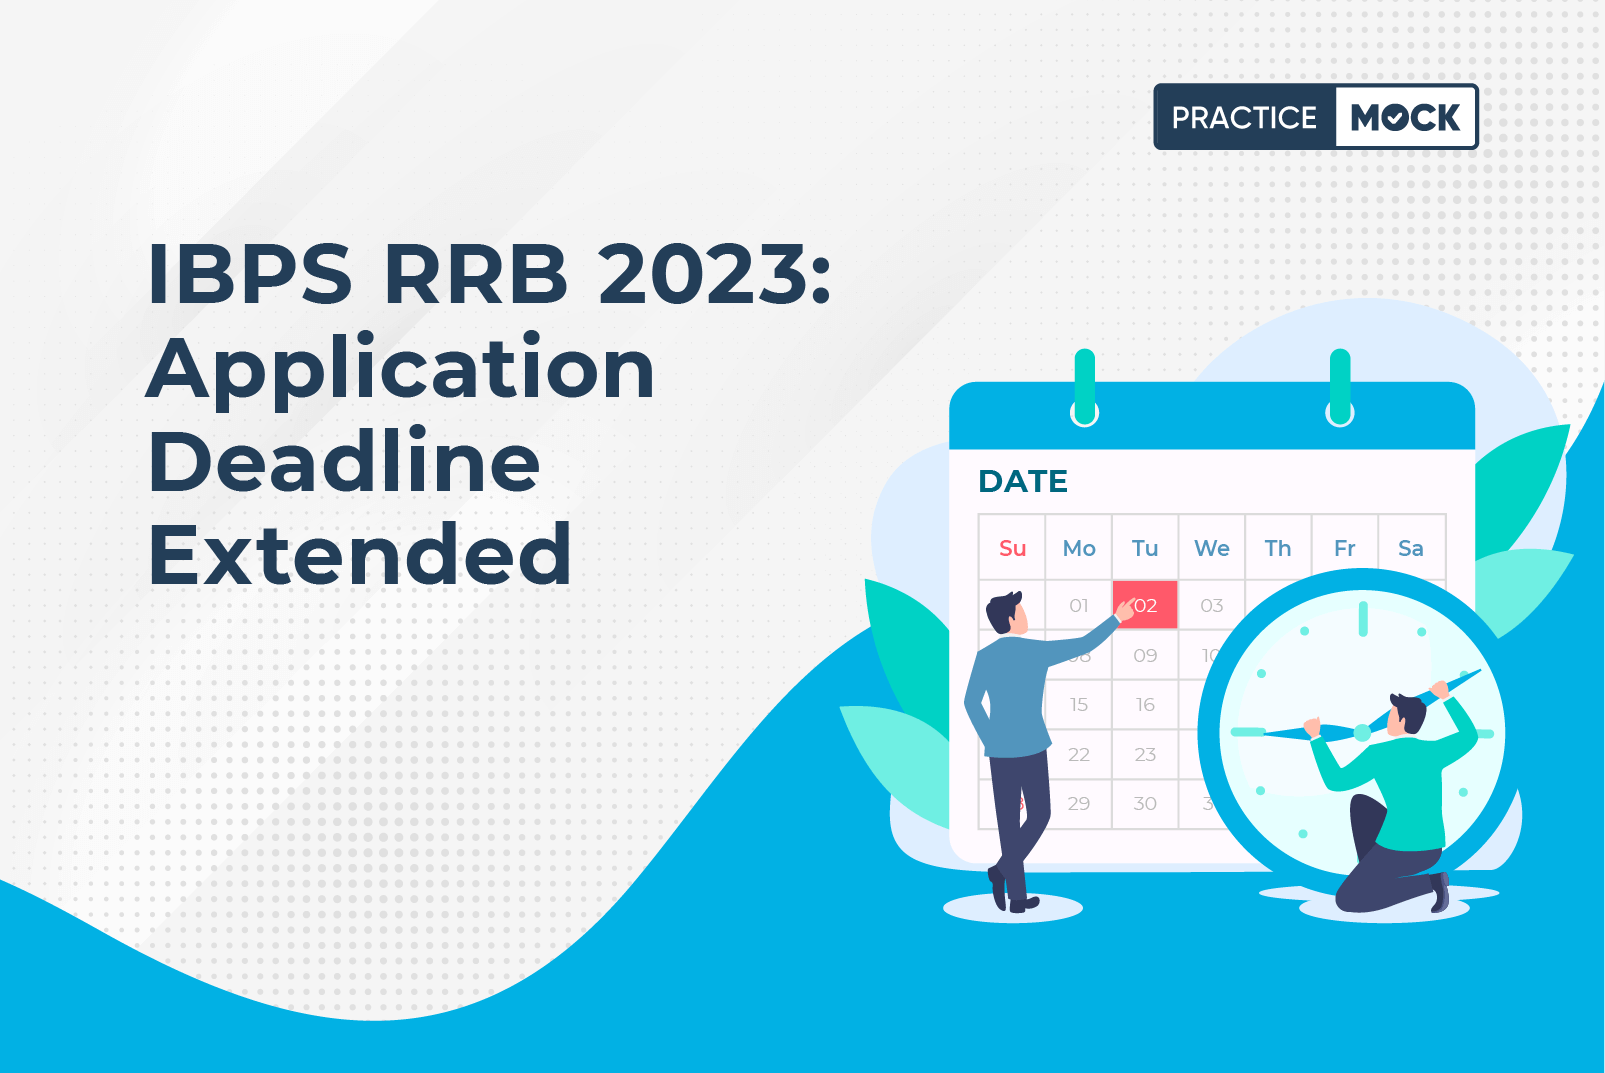 FI_IBPS_RRB_Application_Date_290623 (1)